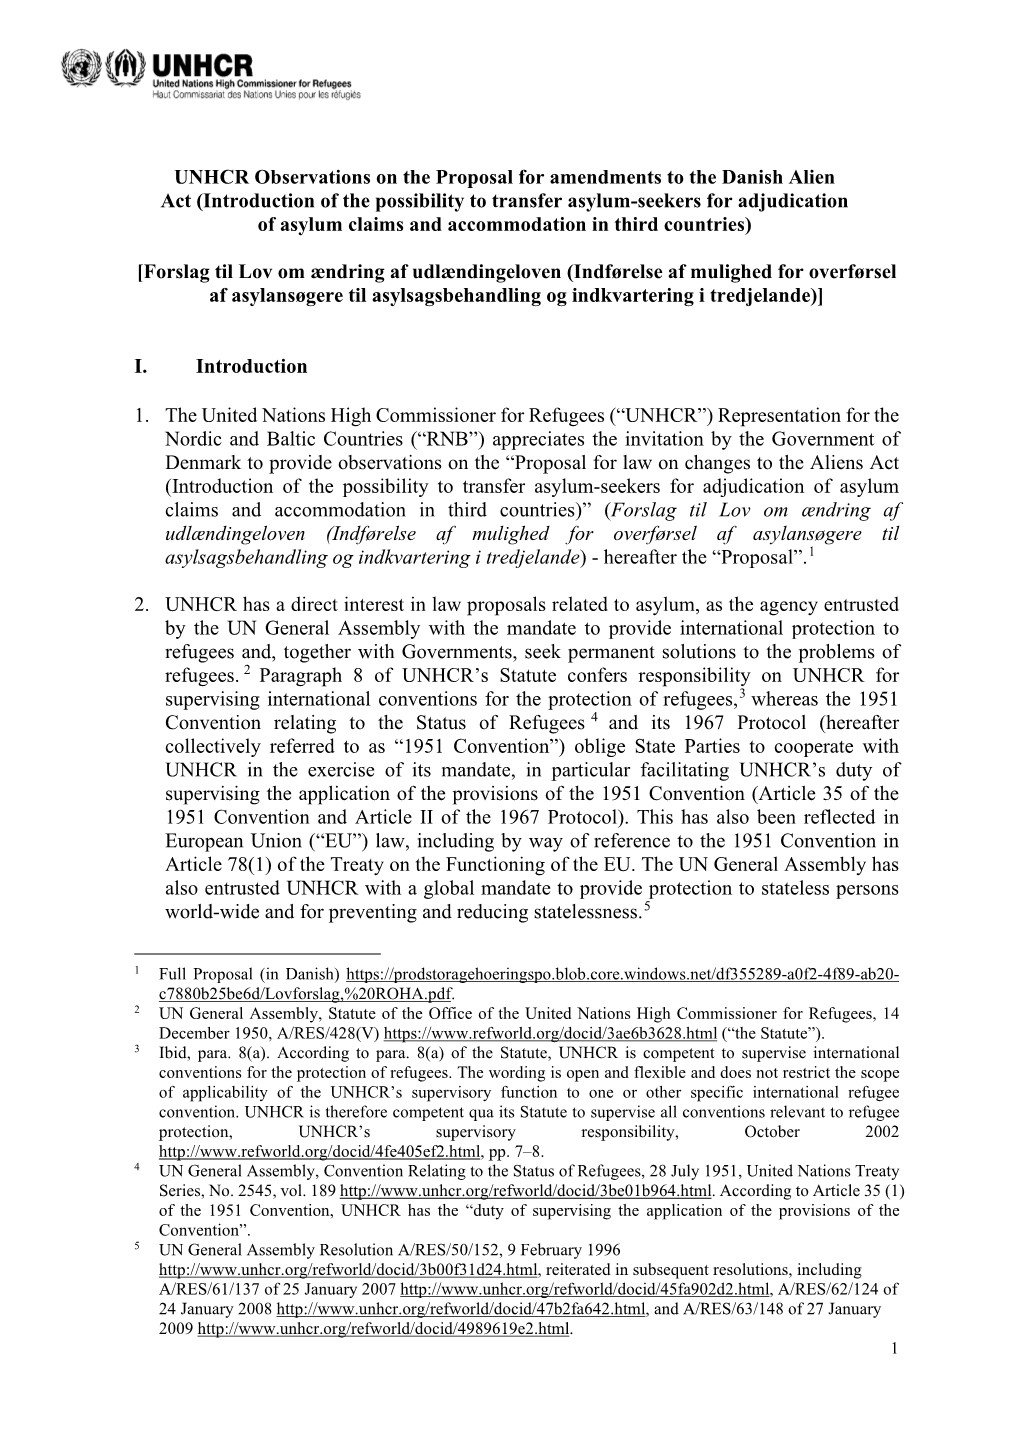 UNHCR Observations on the Proposal for Amendments to the Danish